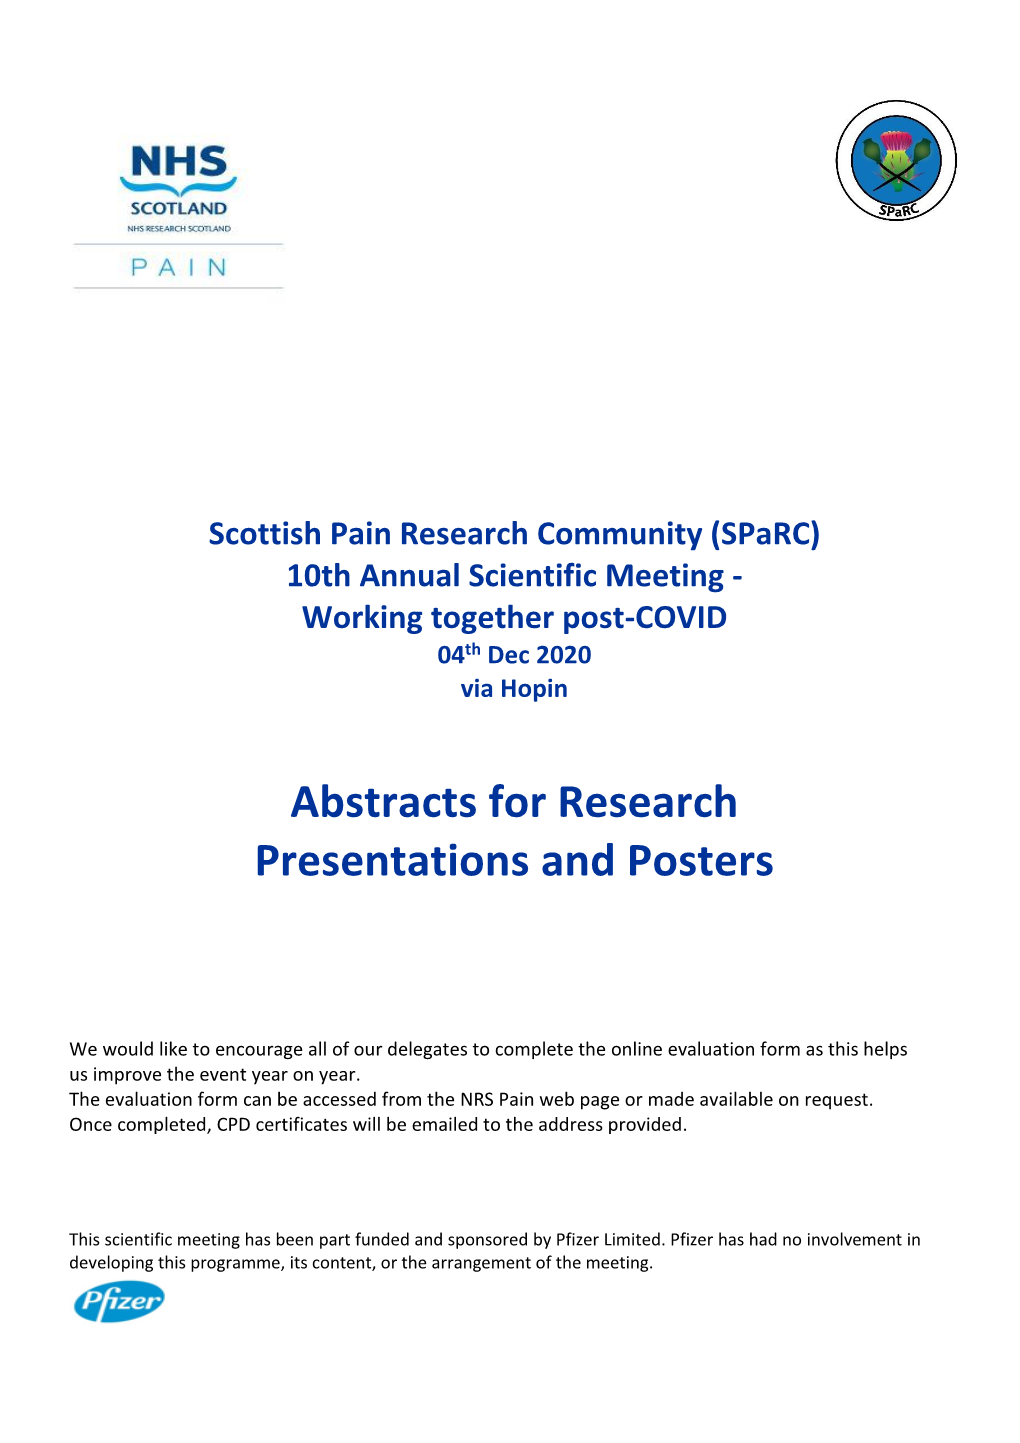 Abstracts for Research Presentations and Posters